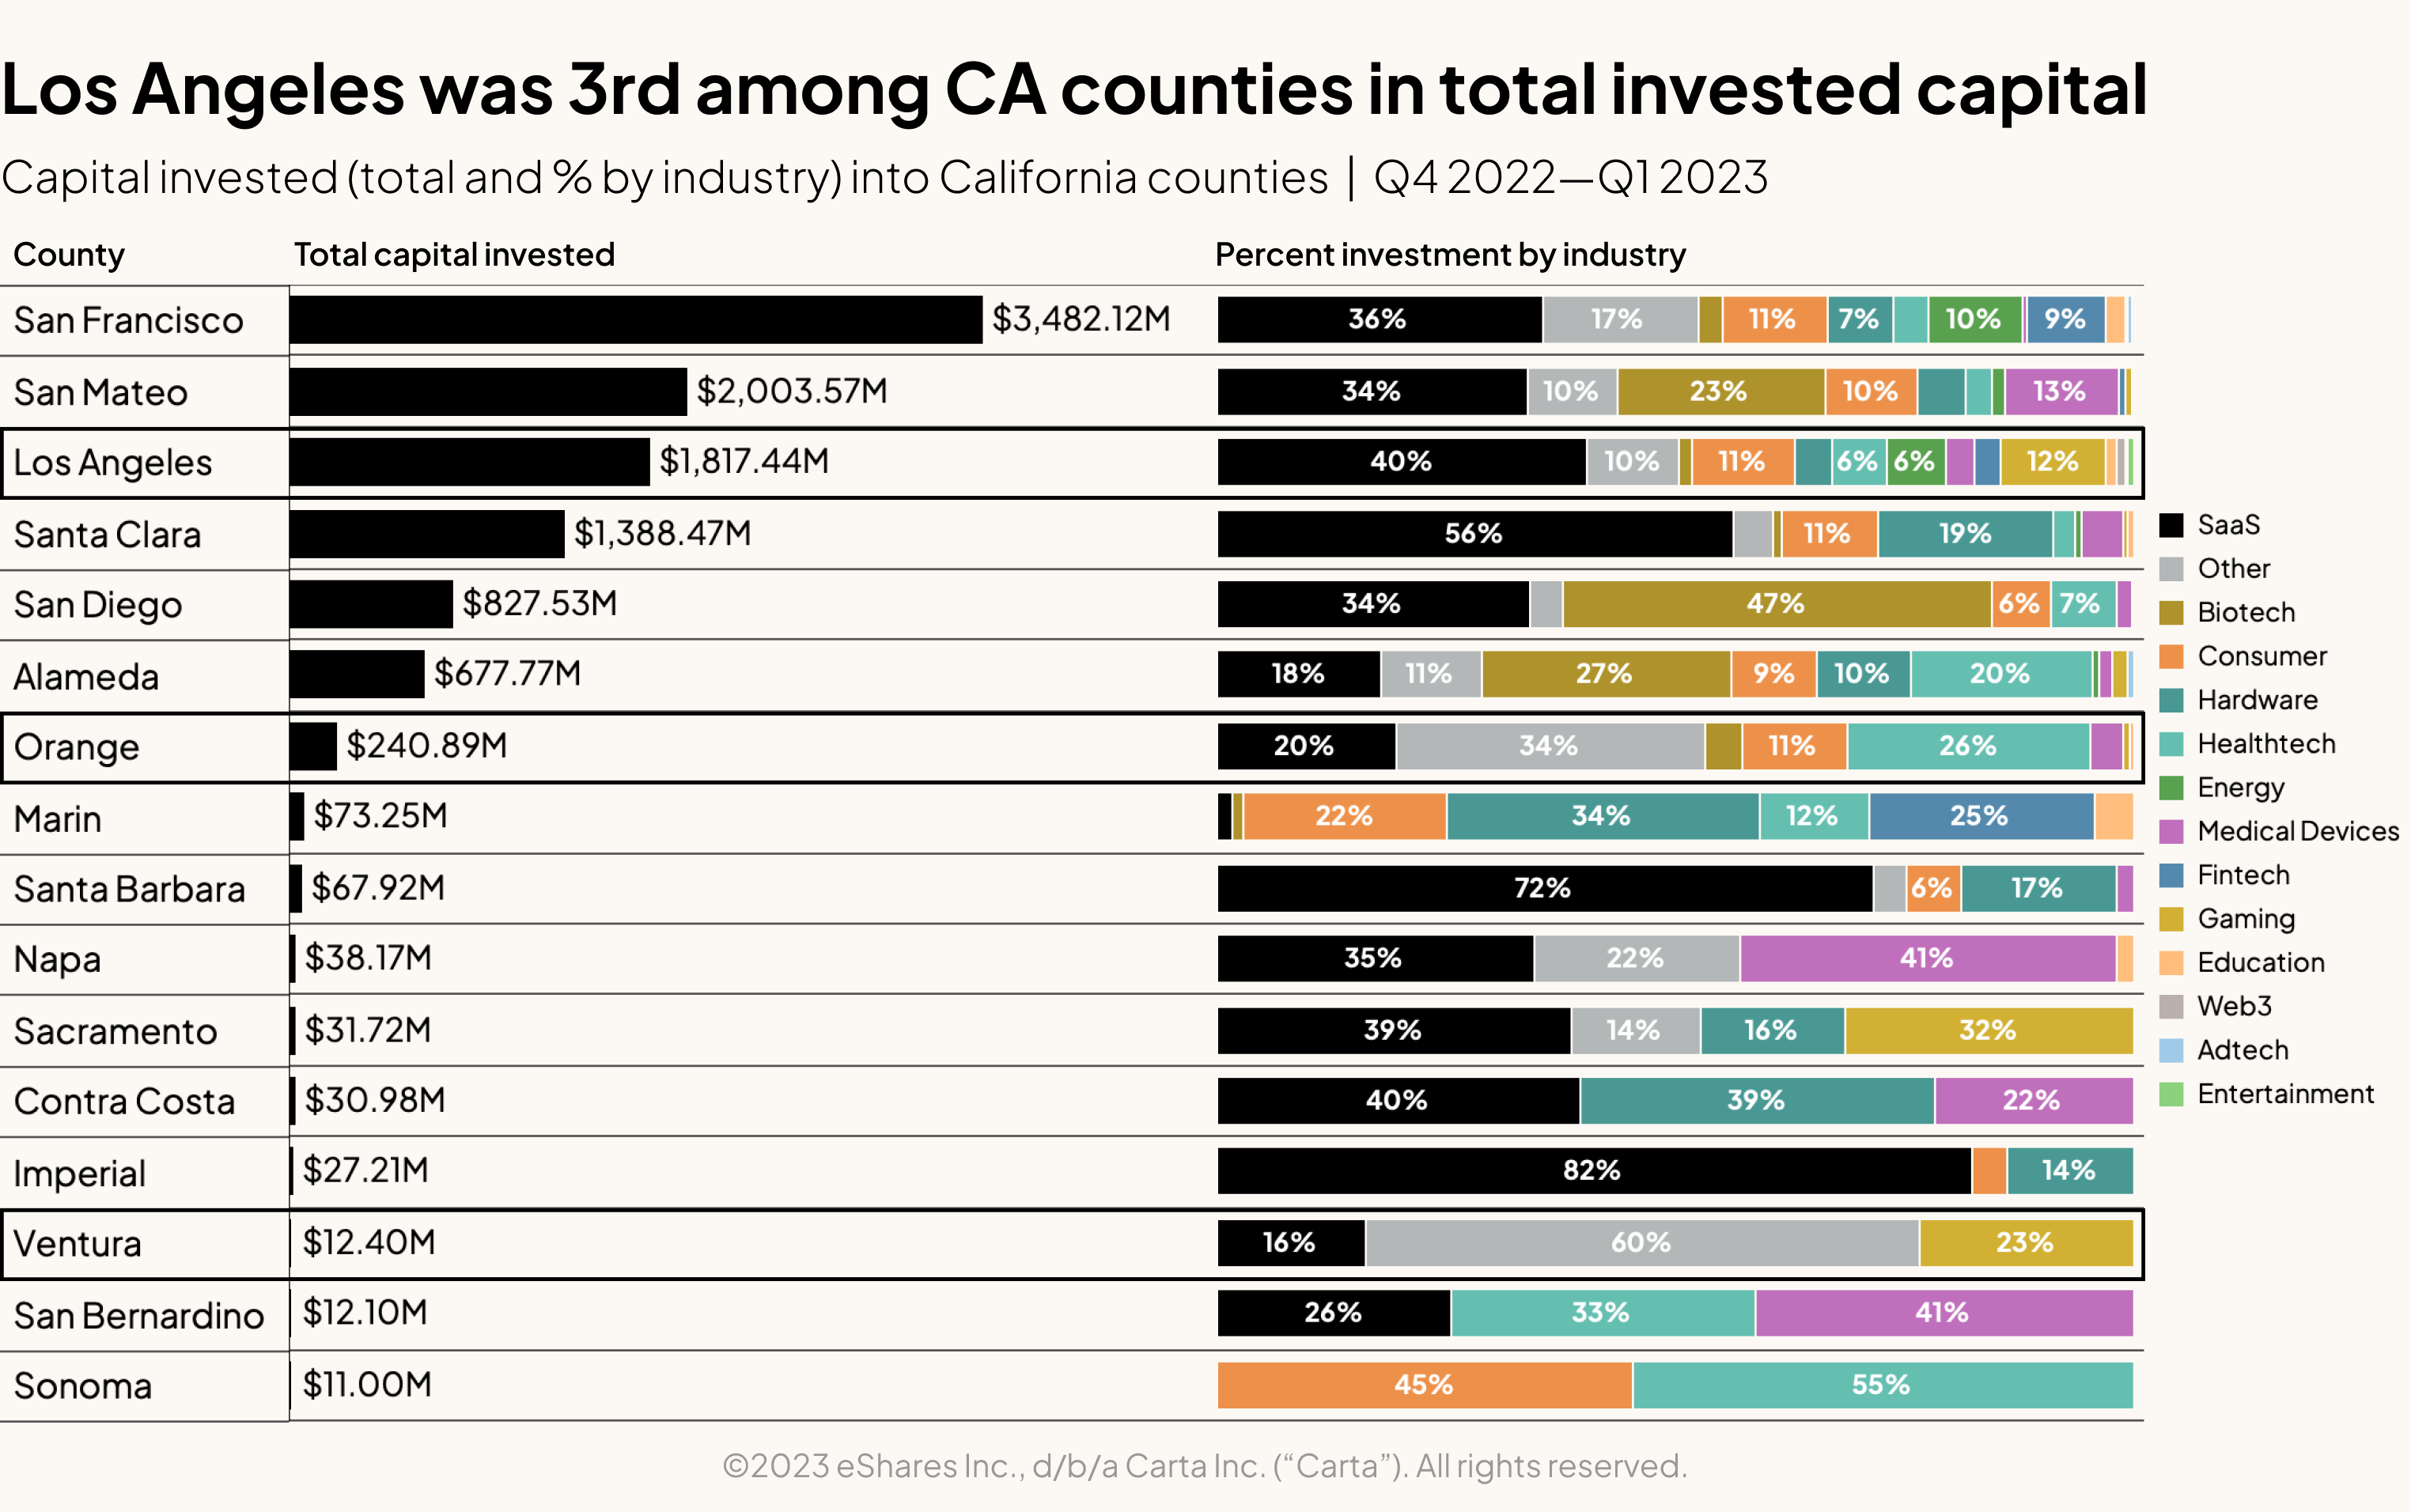 Los Angeles was 3rd among CA counties in total invested capital